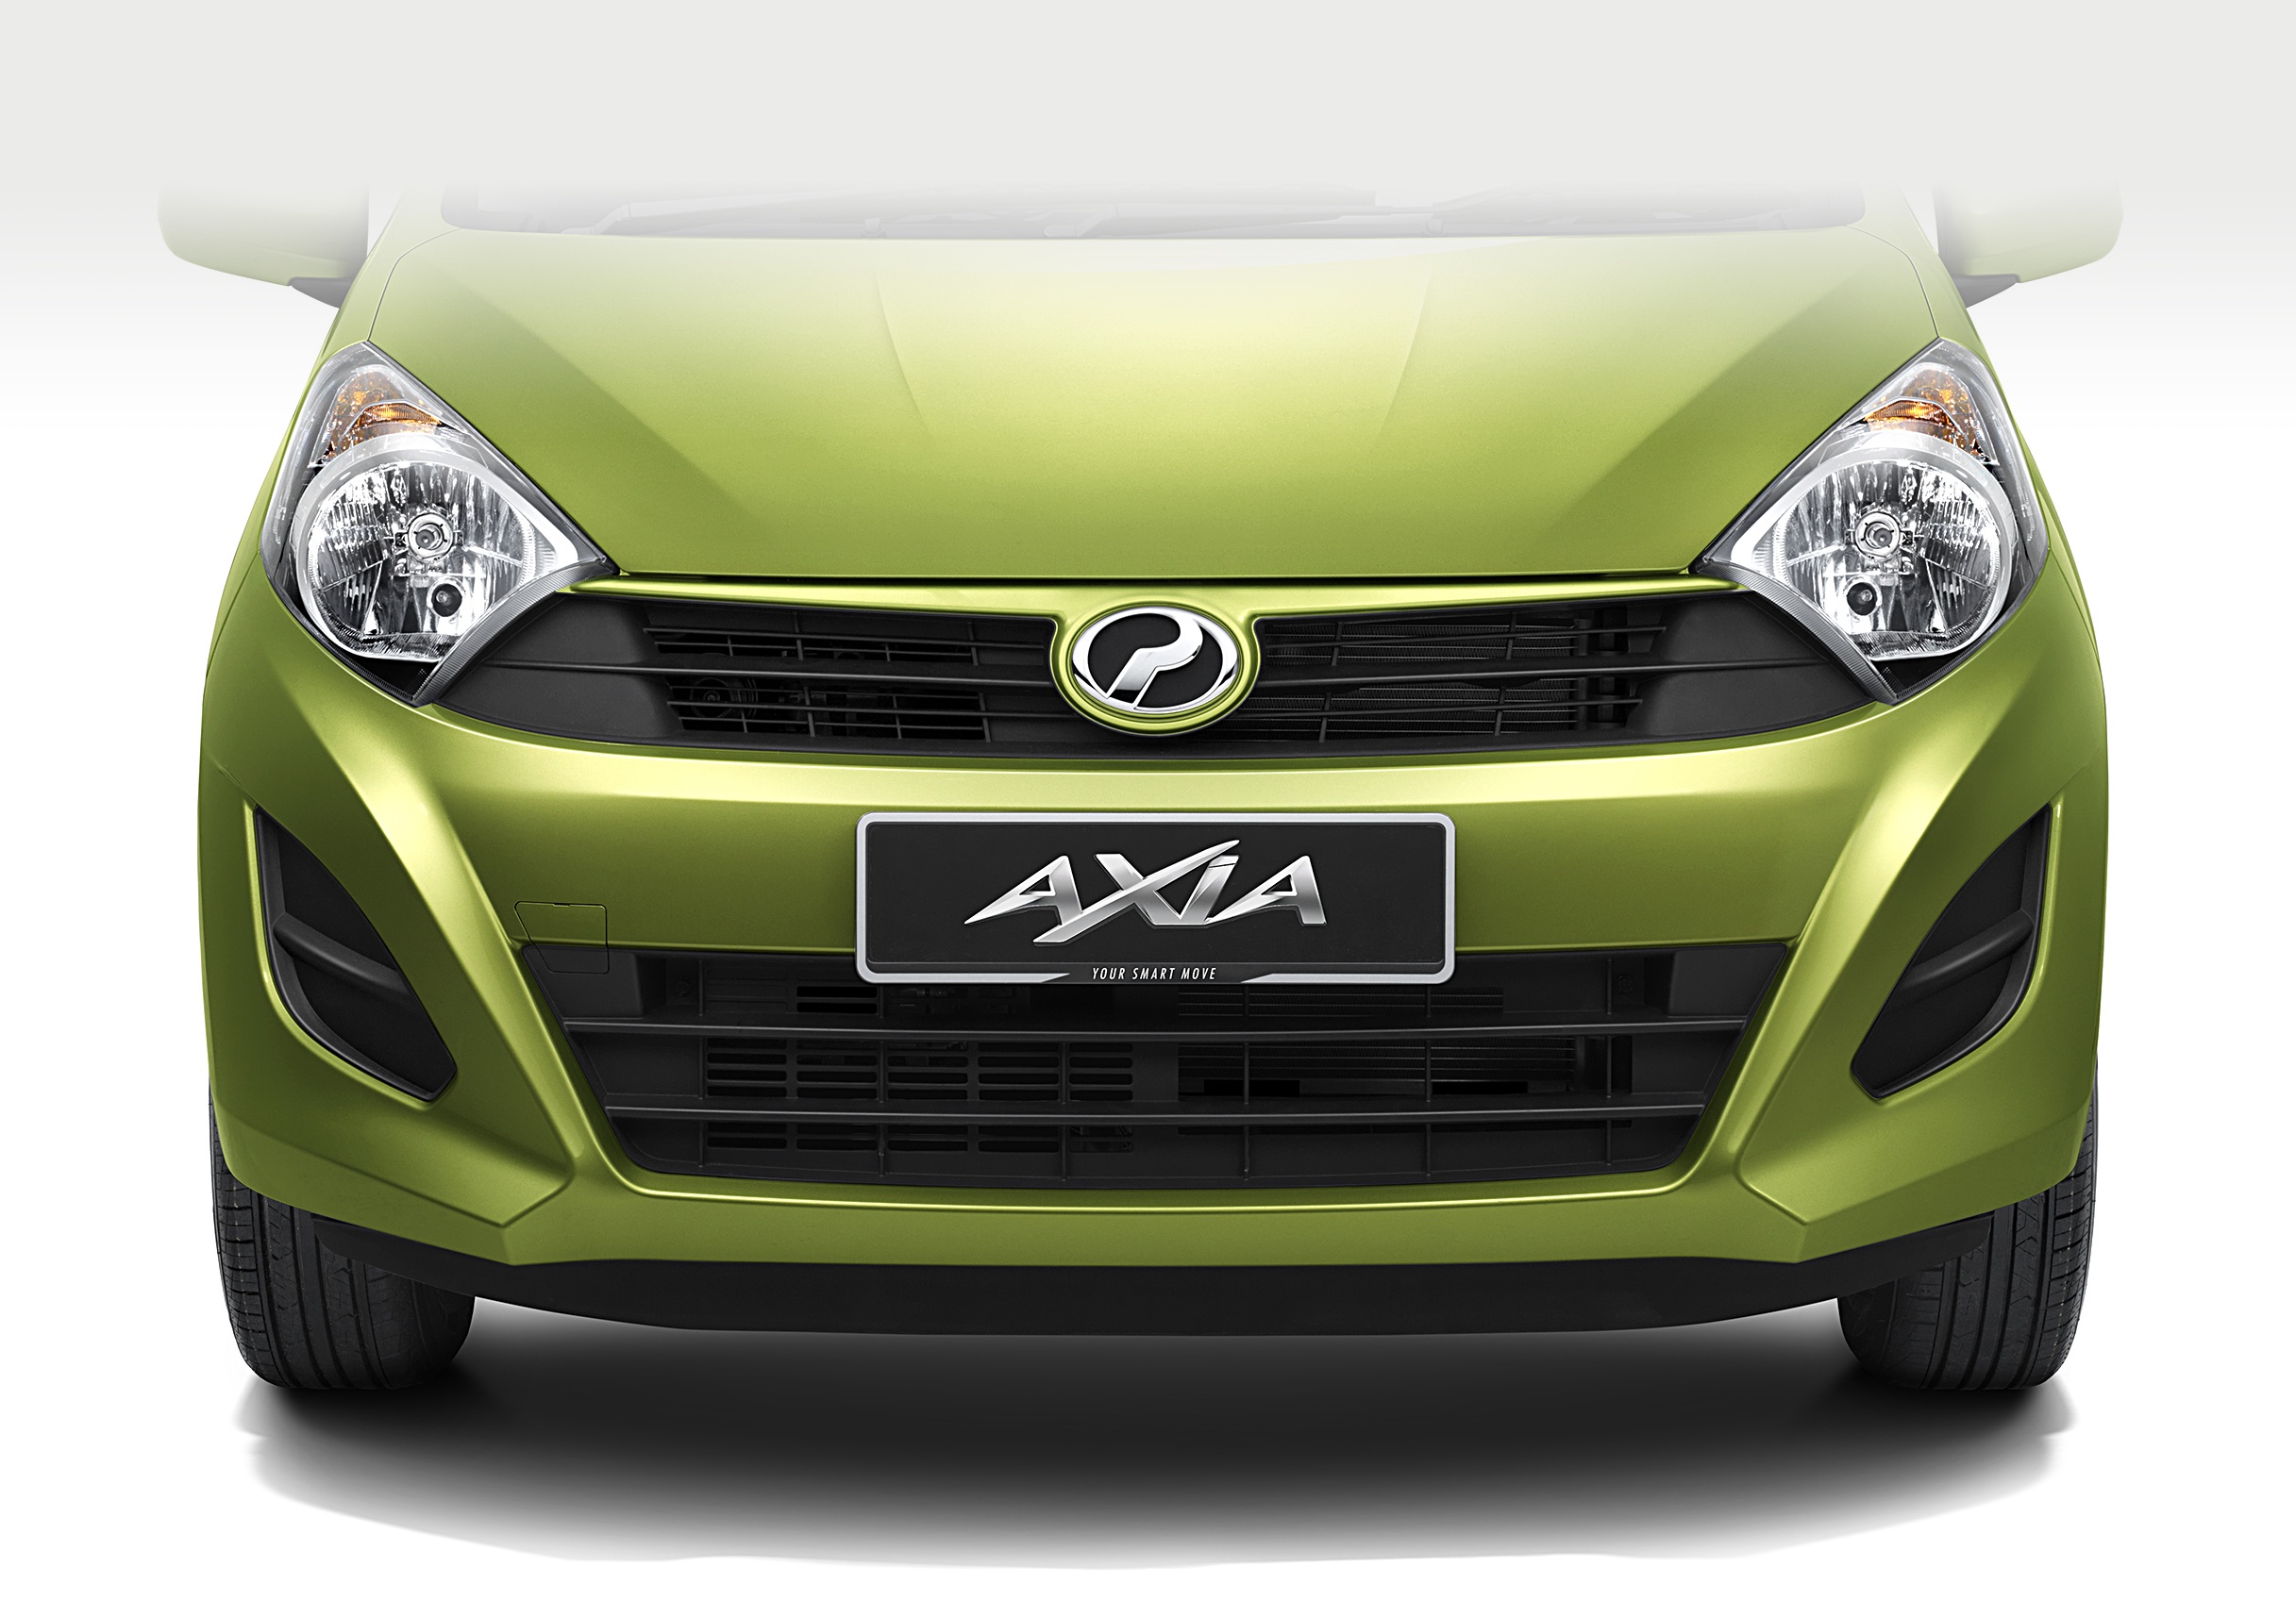 2014 Perodua Axia  first details on specifications and prices of the 1.0 litre E, G, SE and